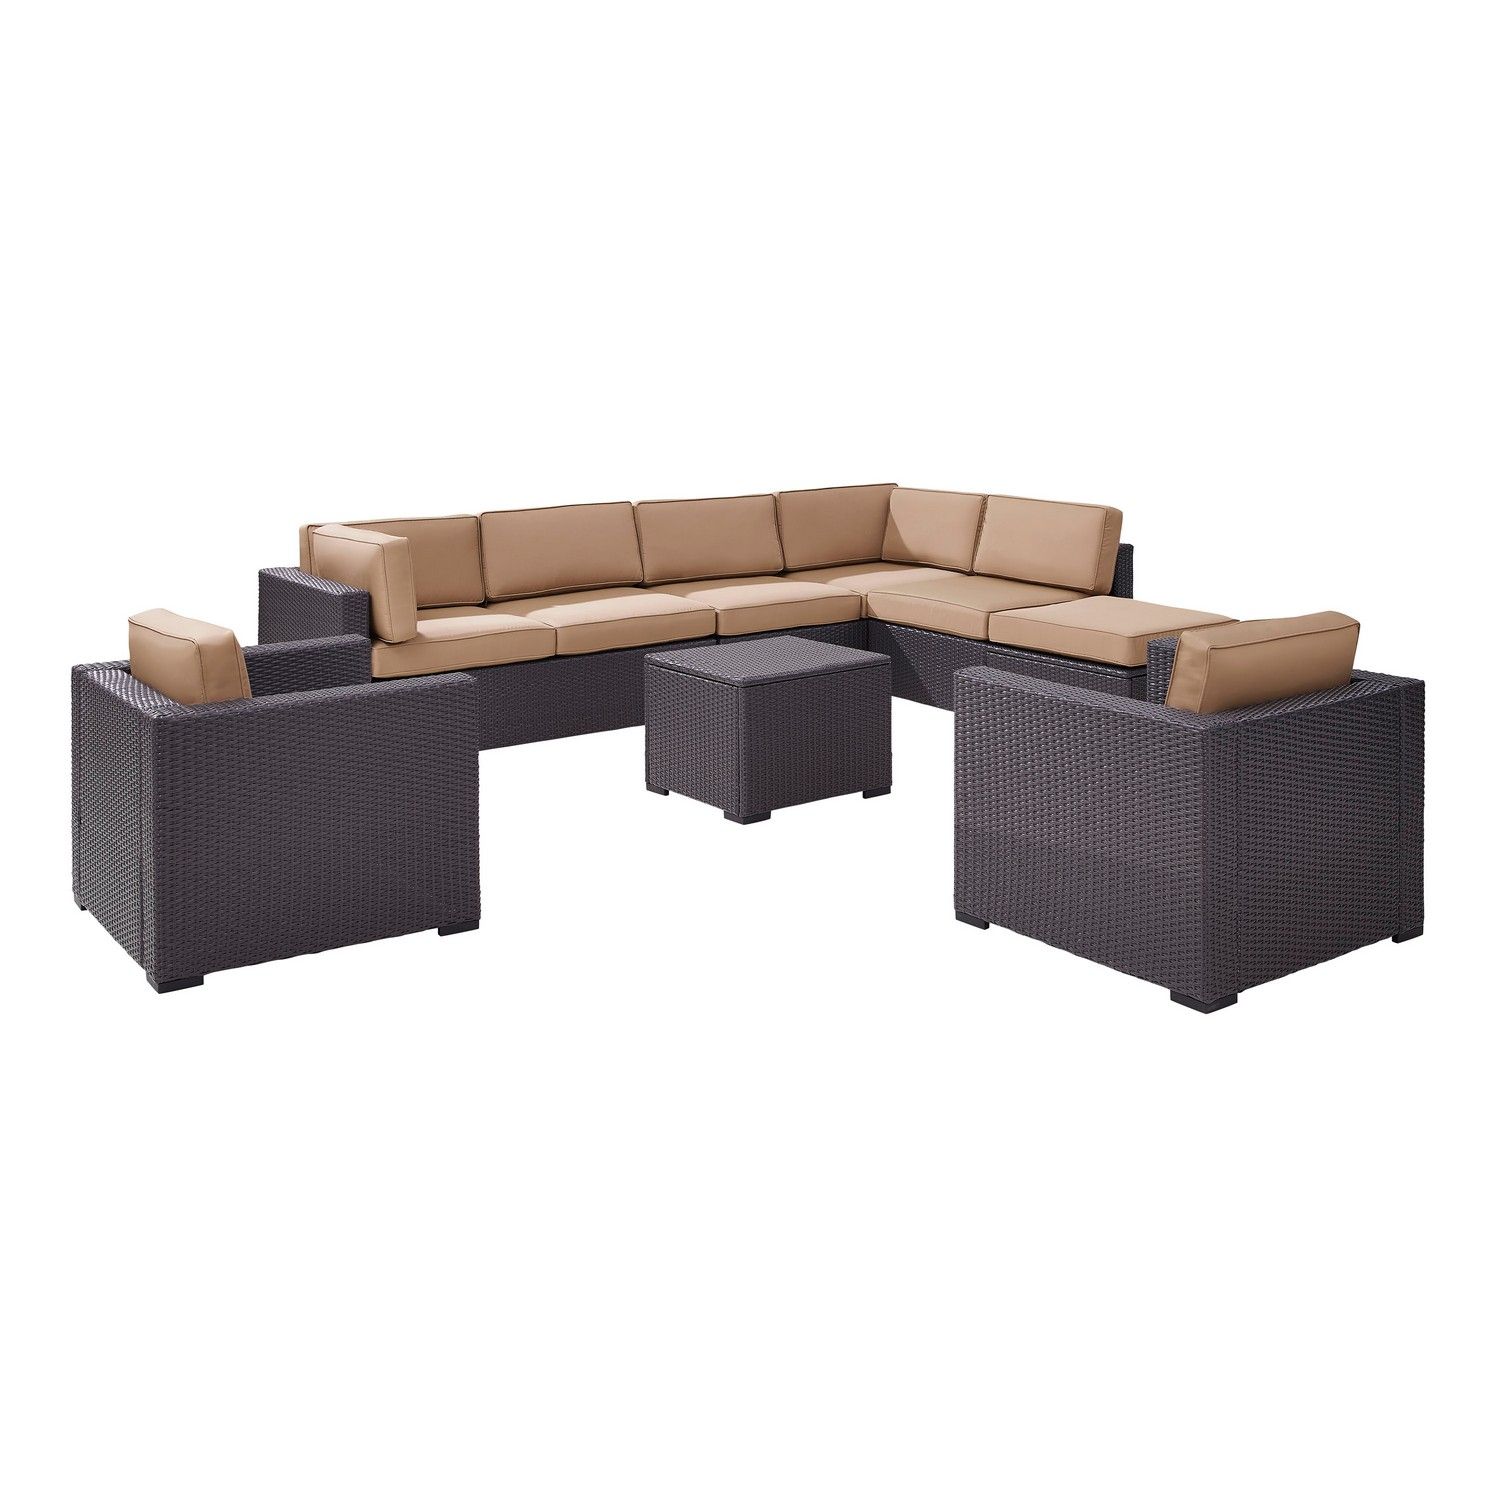 Crosley Biscayne 7-PC Outdoor Wicker Sectional Set - 2 Loveseats, 2 Arm Chairs, Armless Chair, Coffee Table, Ottoman - Mocha/Brown